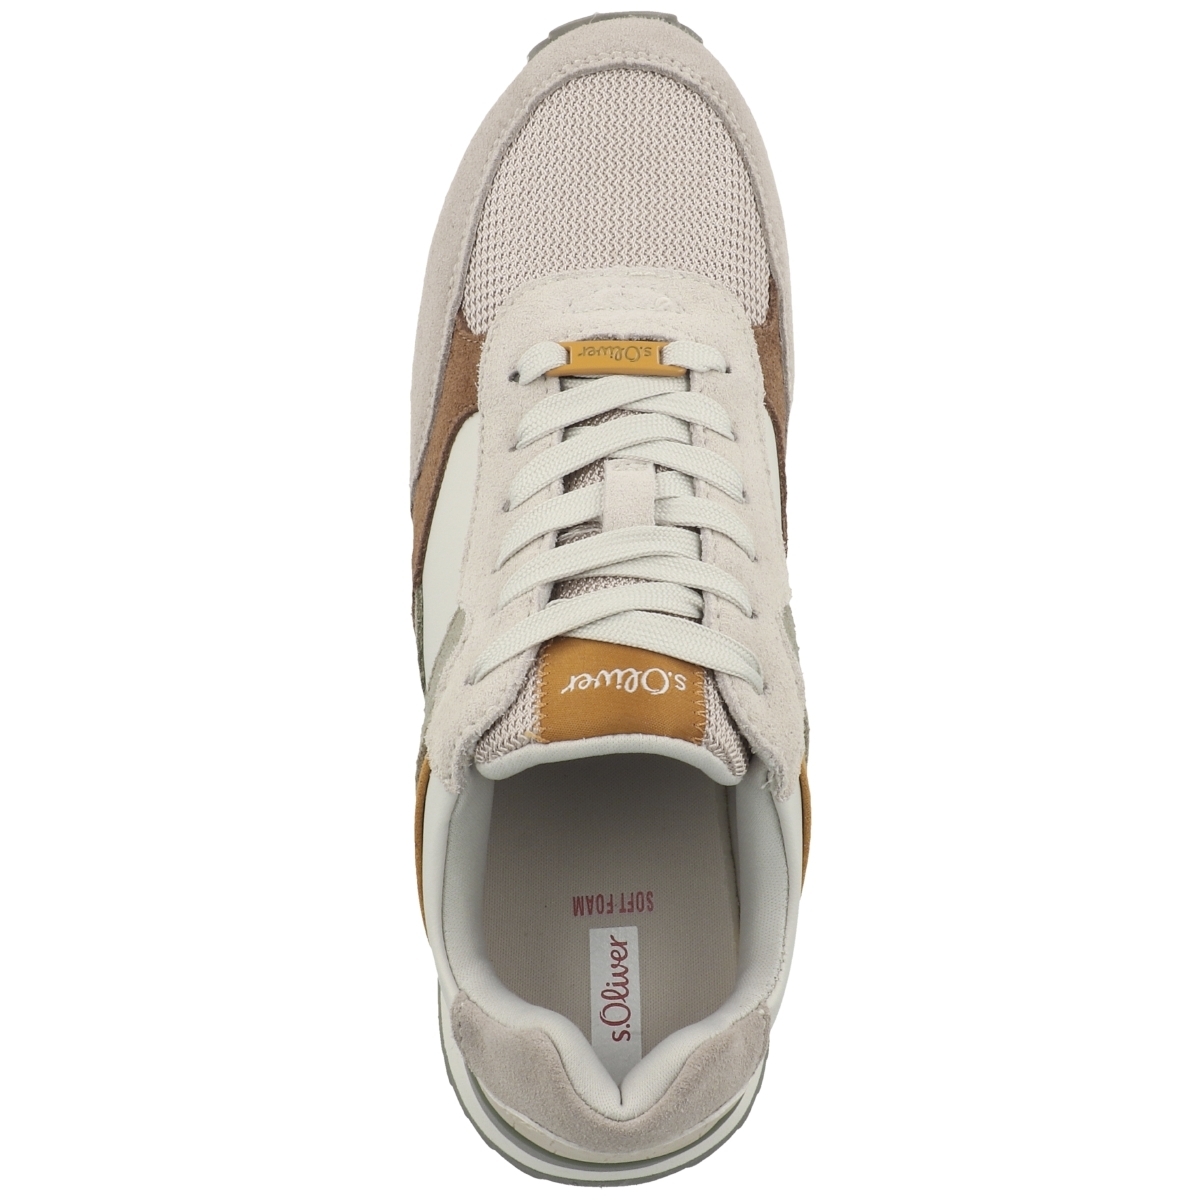 s.Oliver 5-23603-38 Sneaker low